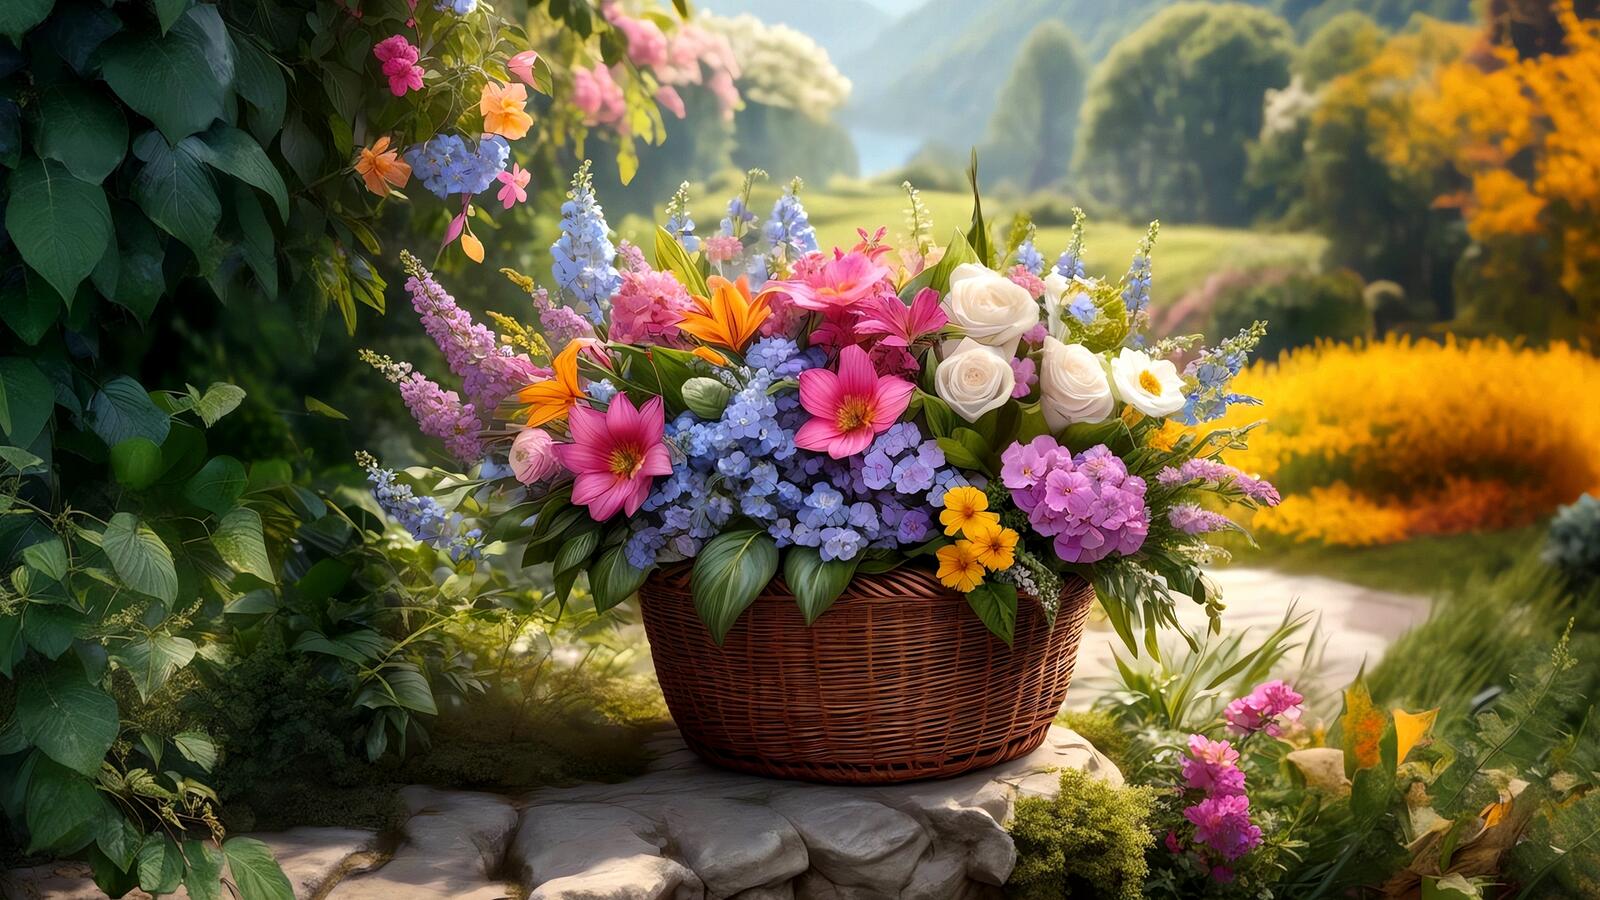 Free photo A basket of flowers stands against the backdrop of nature